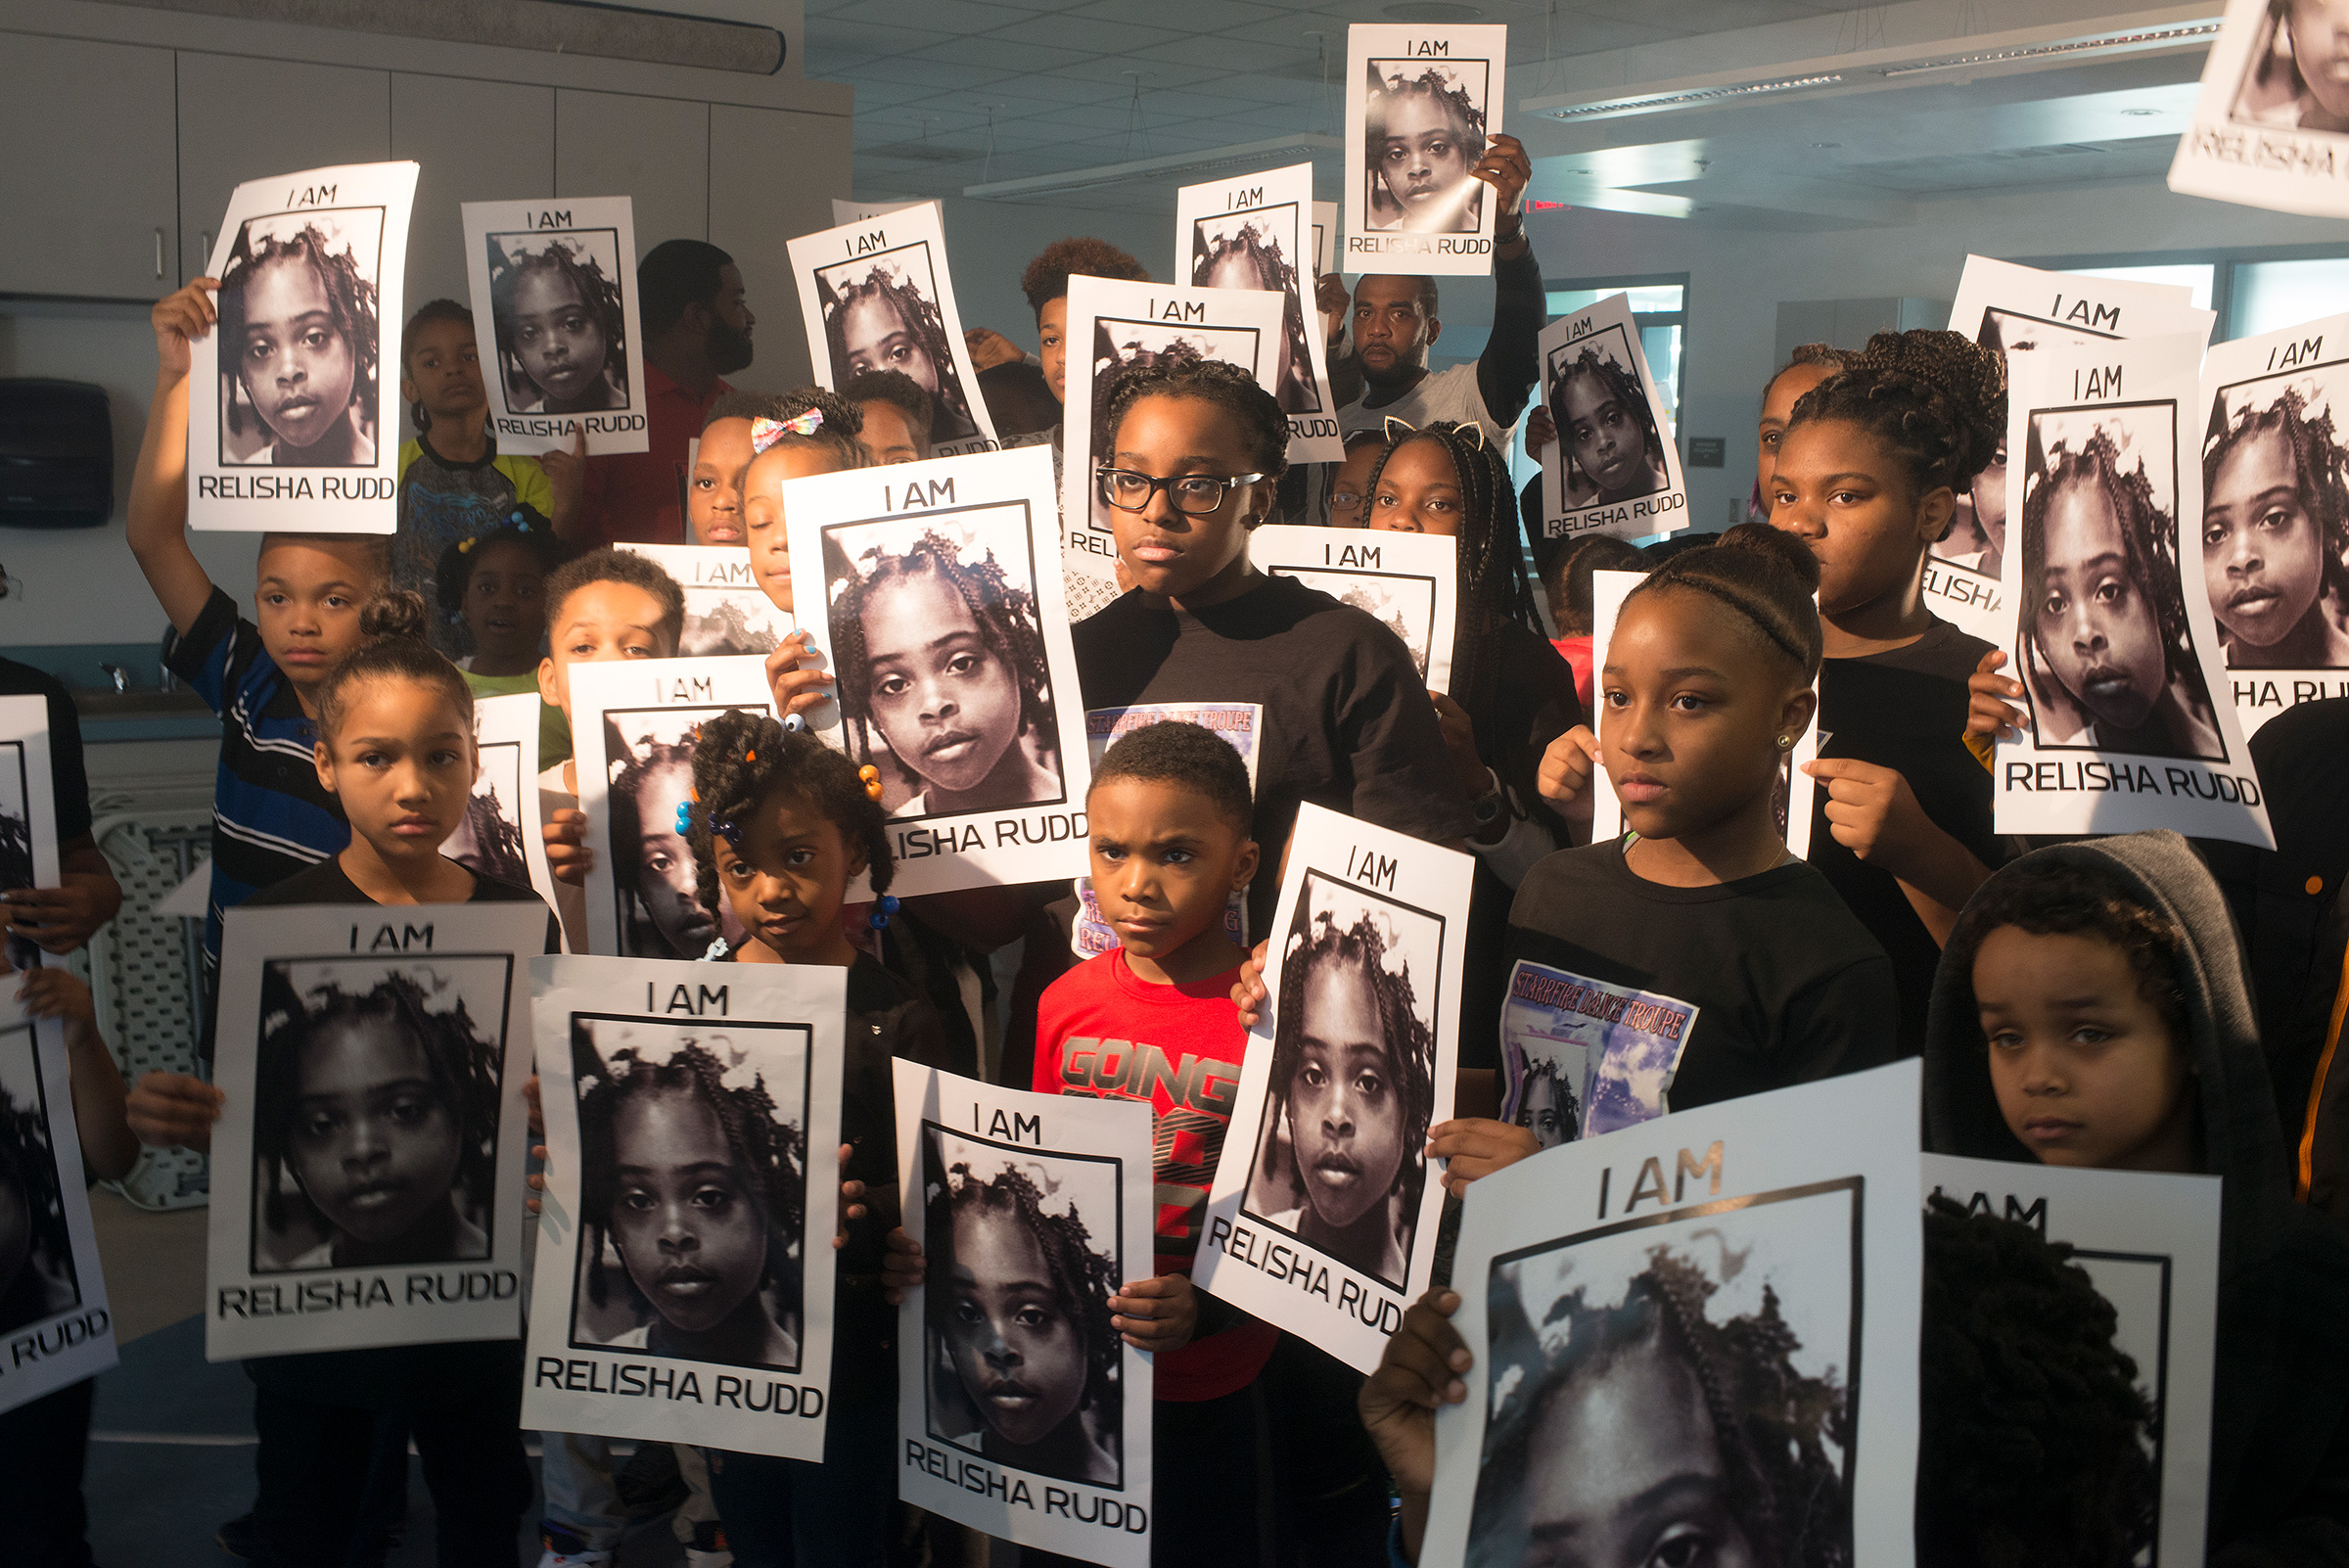 Community members participate in a remembrance celebration of Relisha Rudd at the Deanwood Recreation Center in Washington, D.C. on Feb. 27, 2016. (Marvin Joseph—The Washington Post/Getty Images)